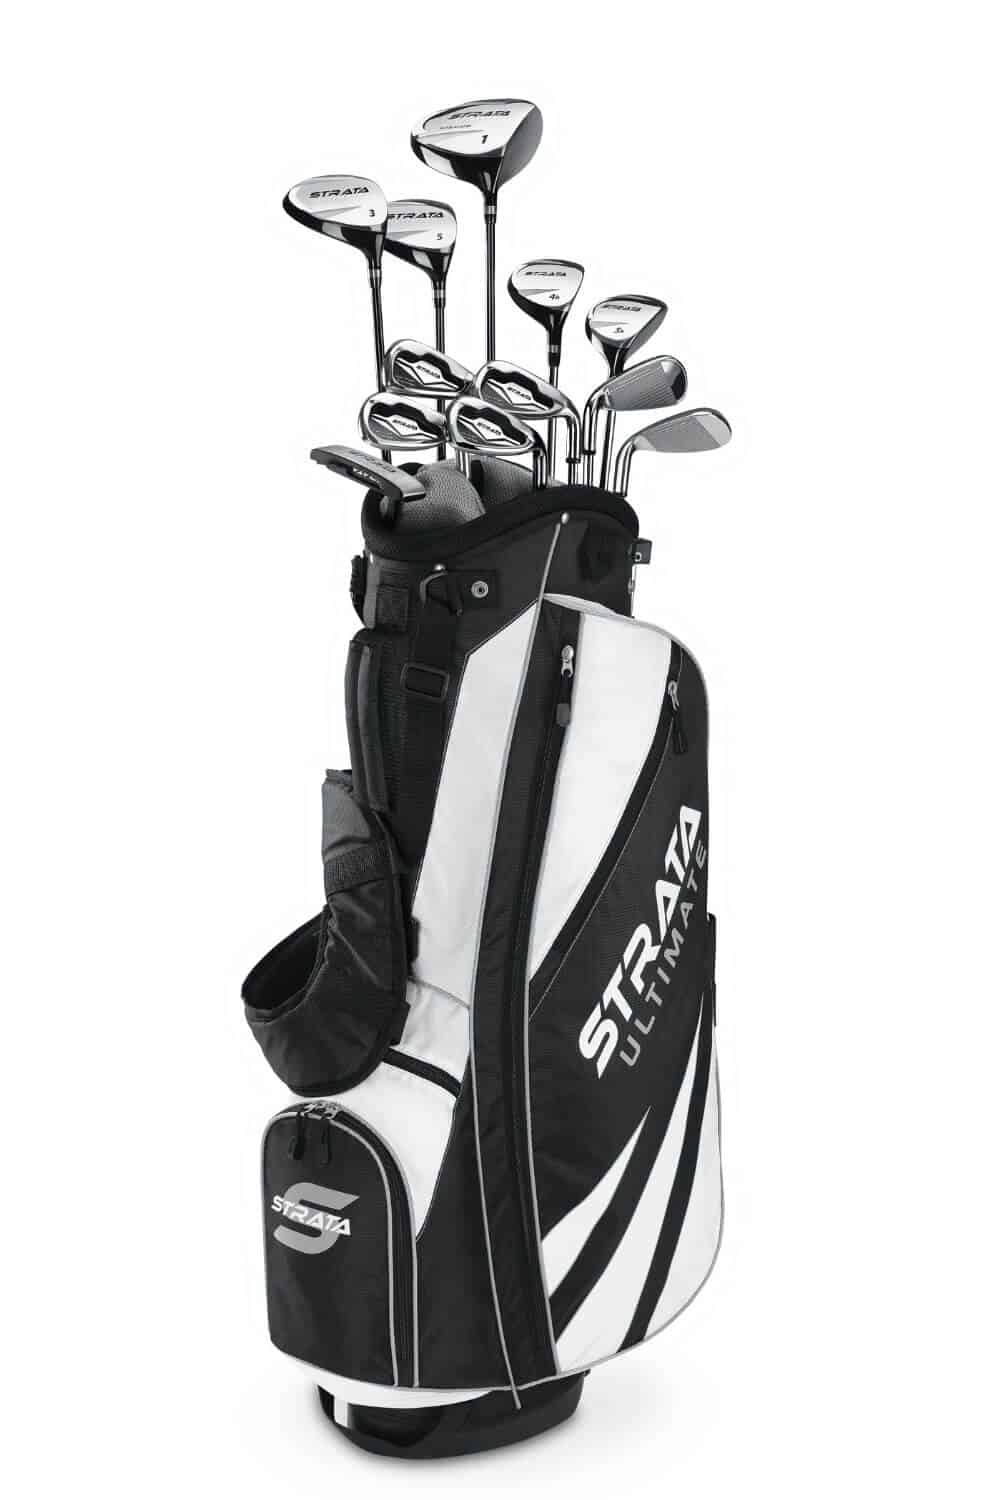 Callaway Women's Strata Complete Golf Club Set with Bag (11-Piece)